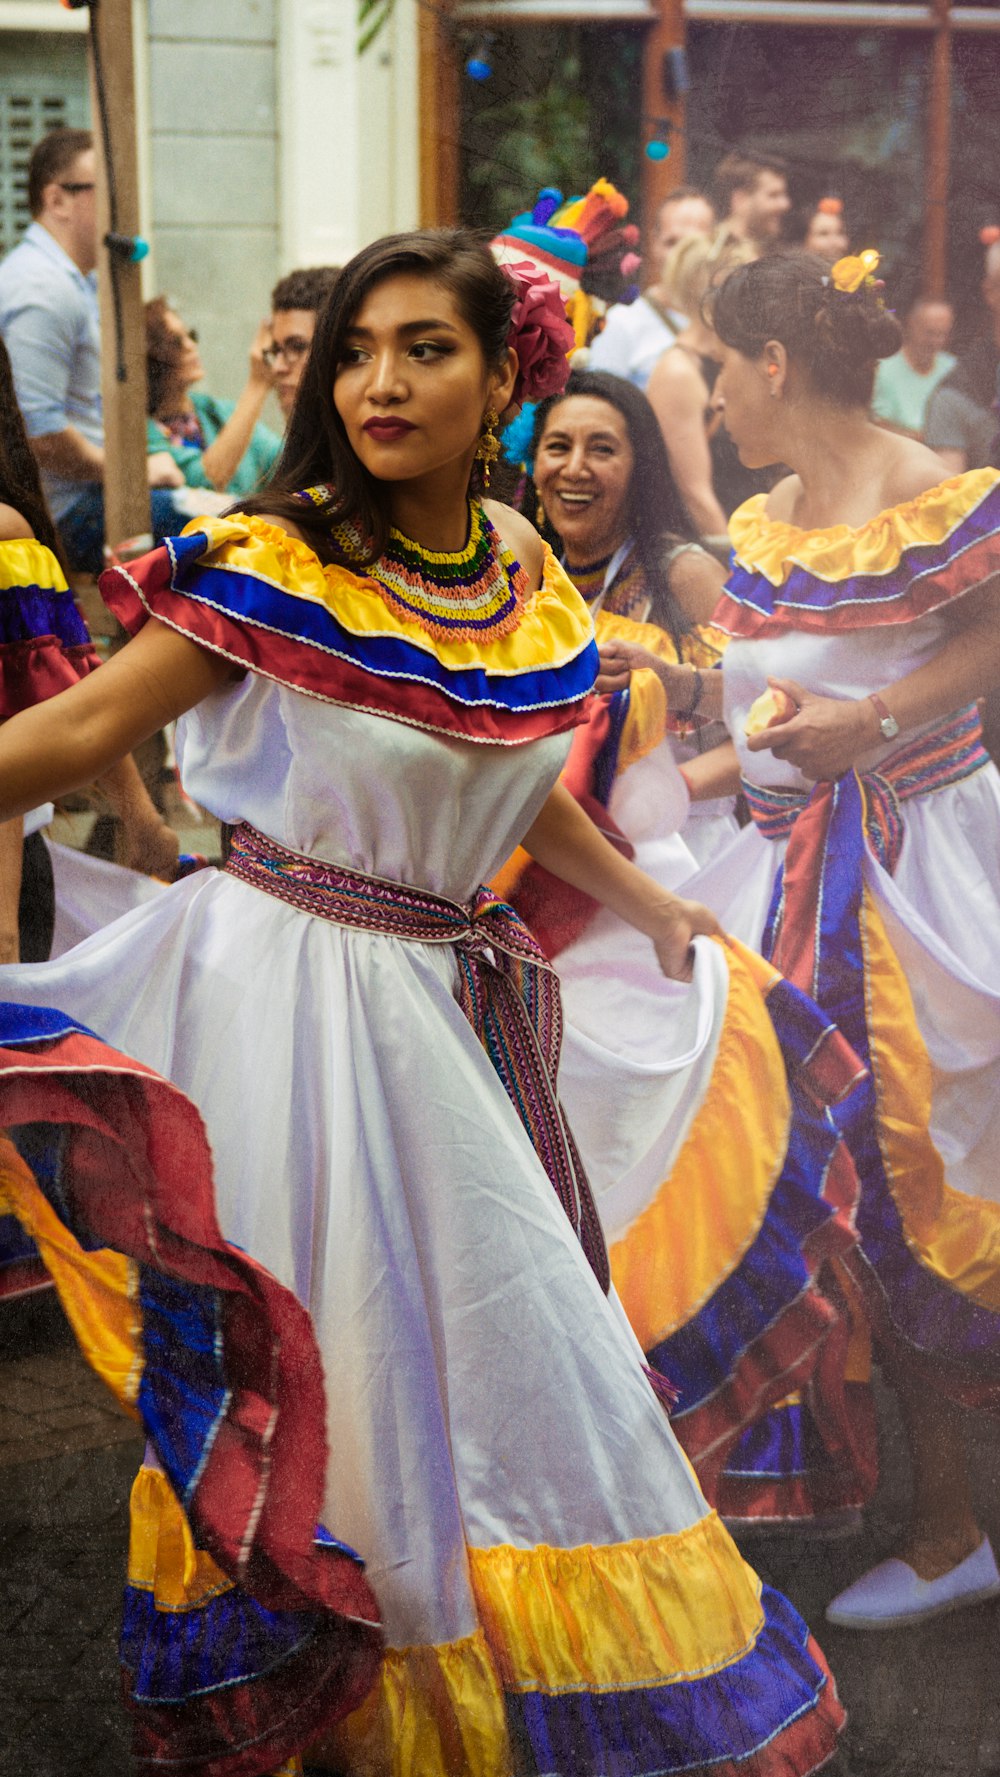 women wearing multicolored dresses dancing on street surrounded with people